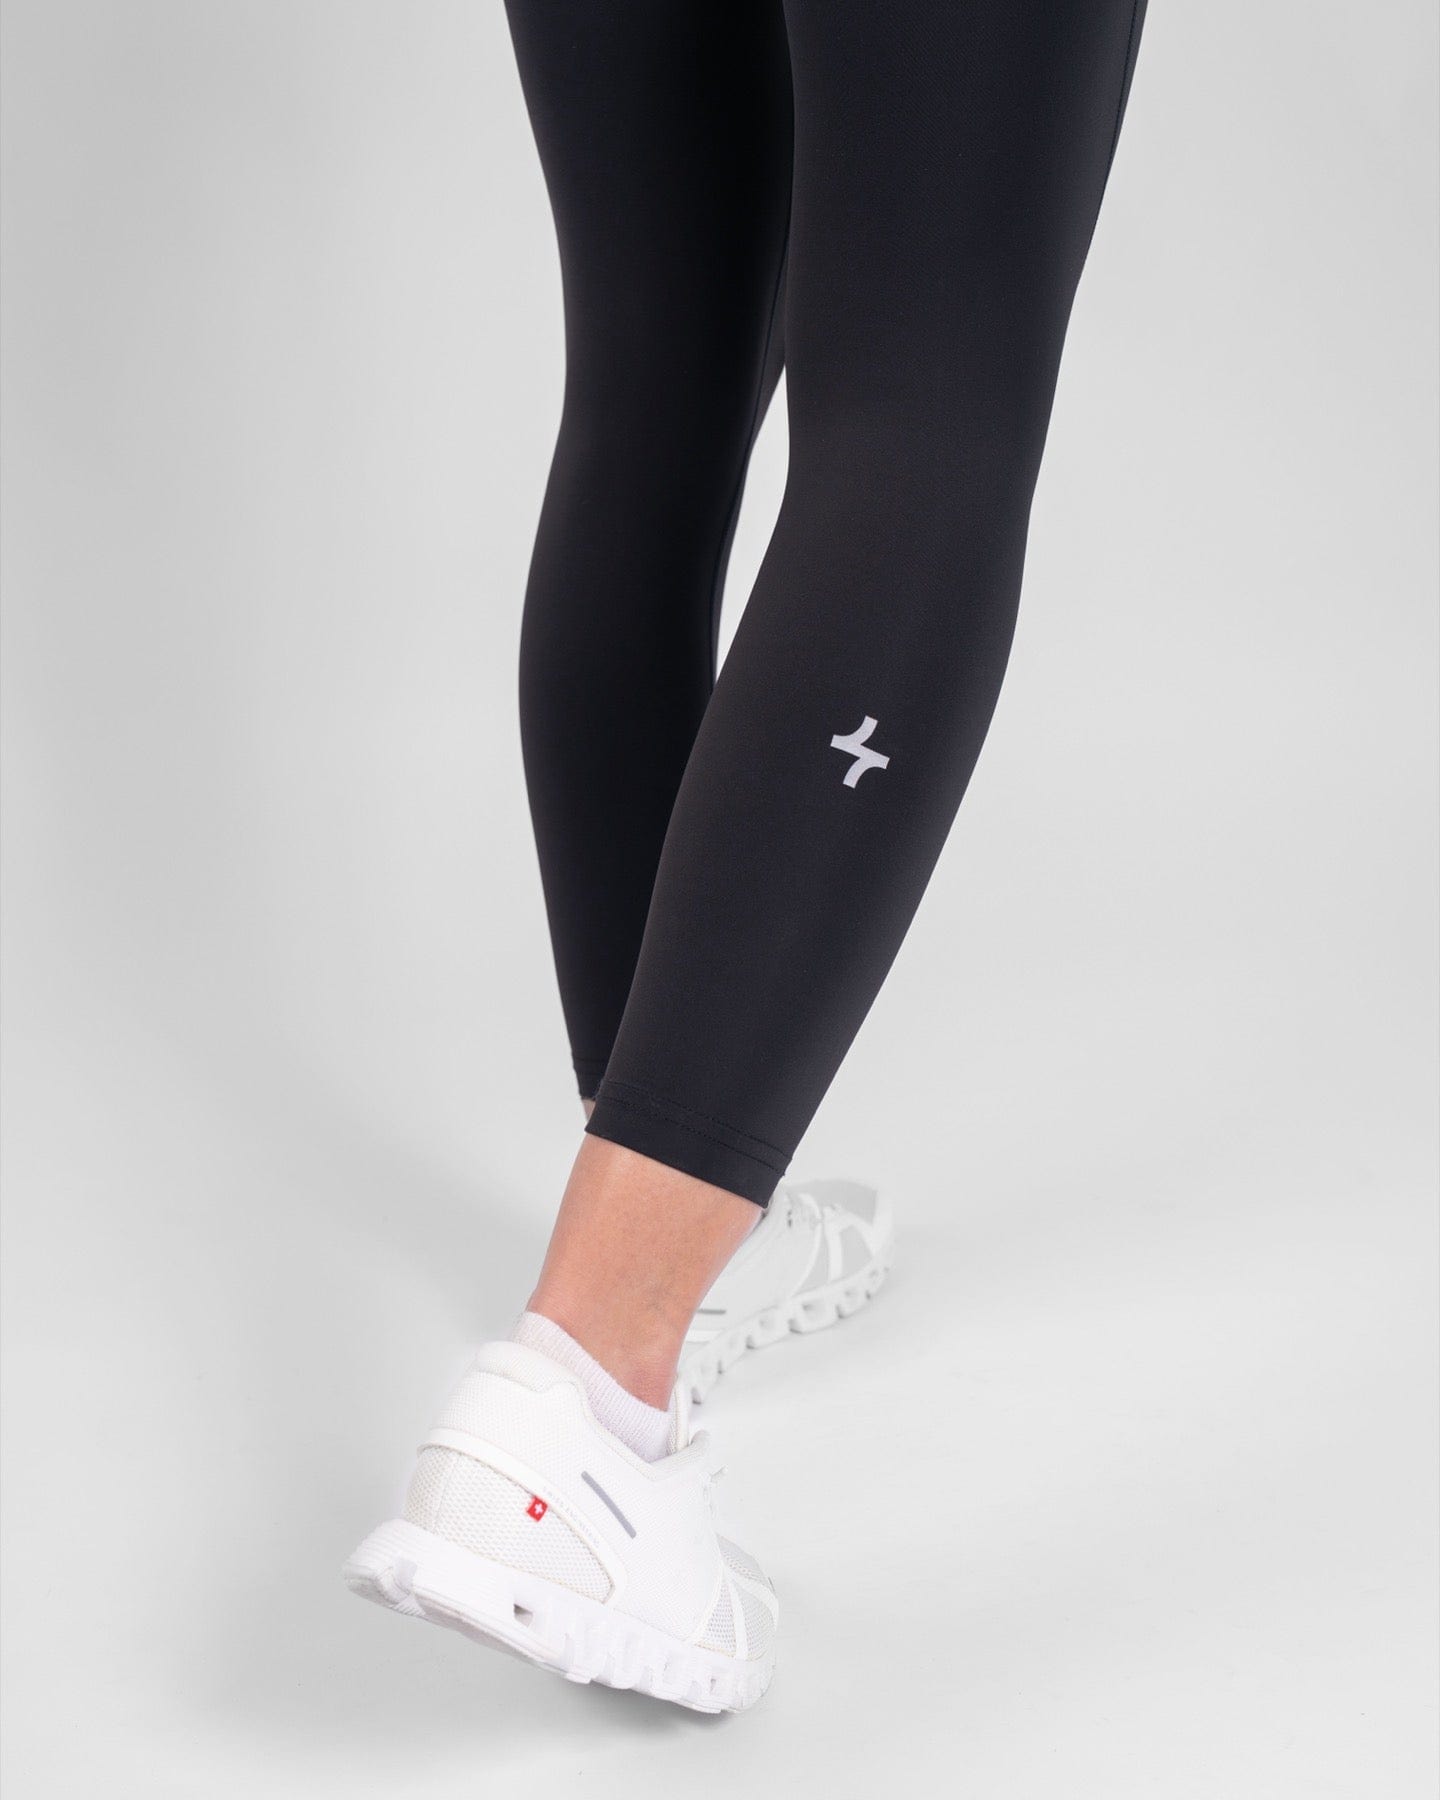 A close-up of a woman's lower legs clad in high-waisted, Black THABYA LEGGINGS and white sneakers, highlighting modest sportswear by qynda.